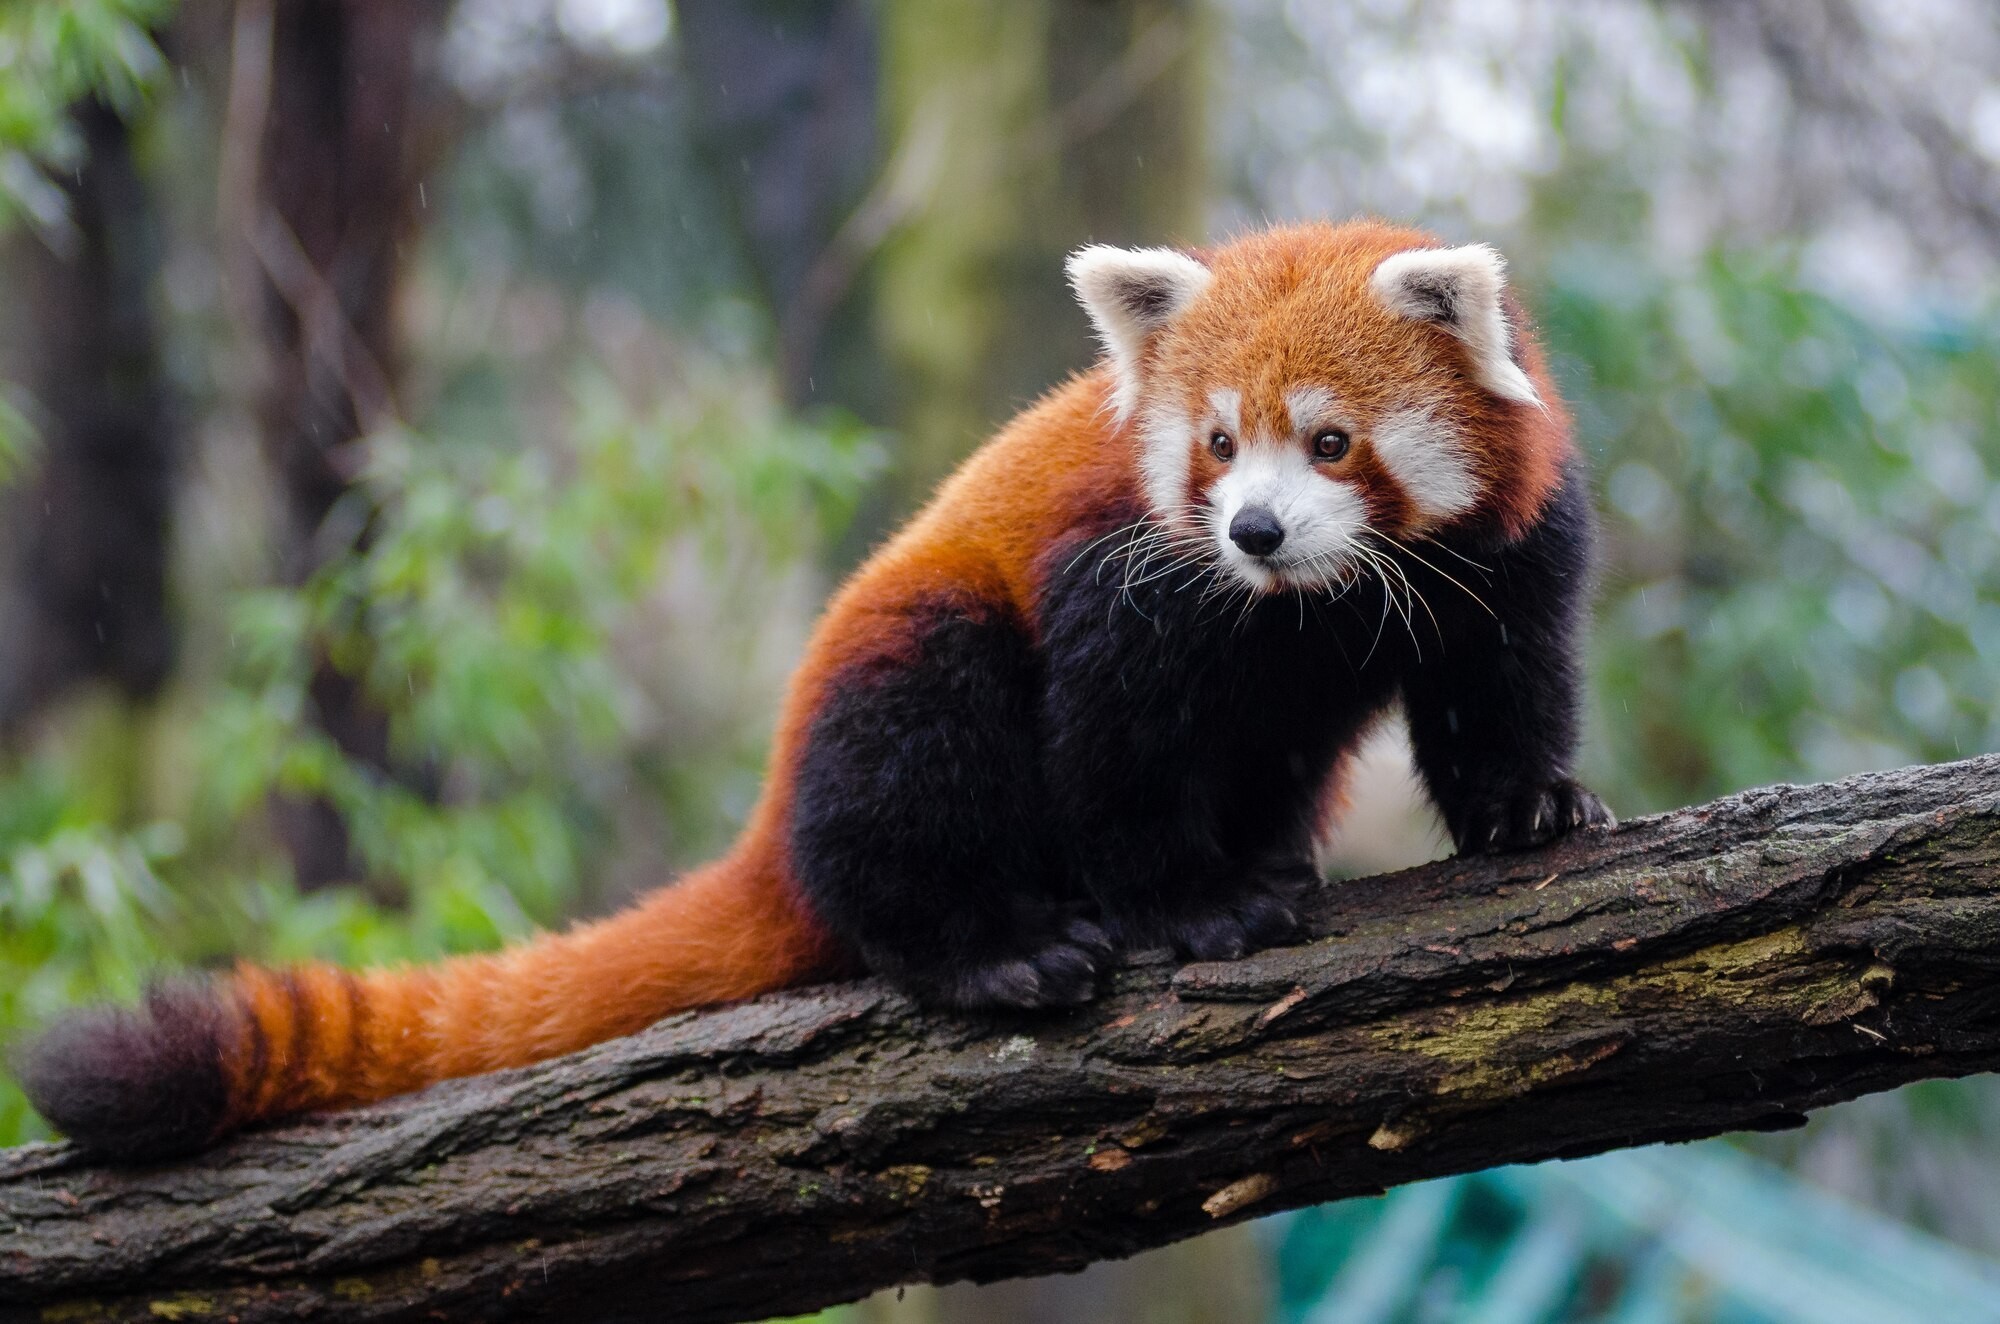 . Army medical team helps Smithsonian National Zoo to protect endangered  Red Pandas | Article | The United States Army